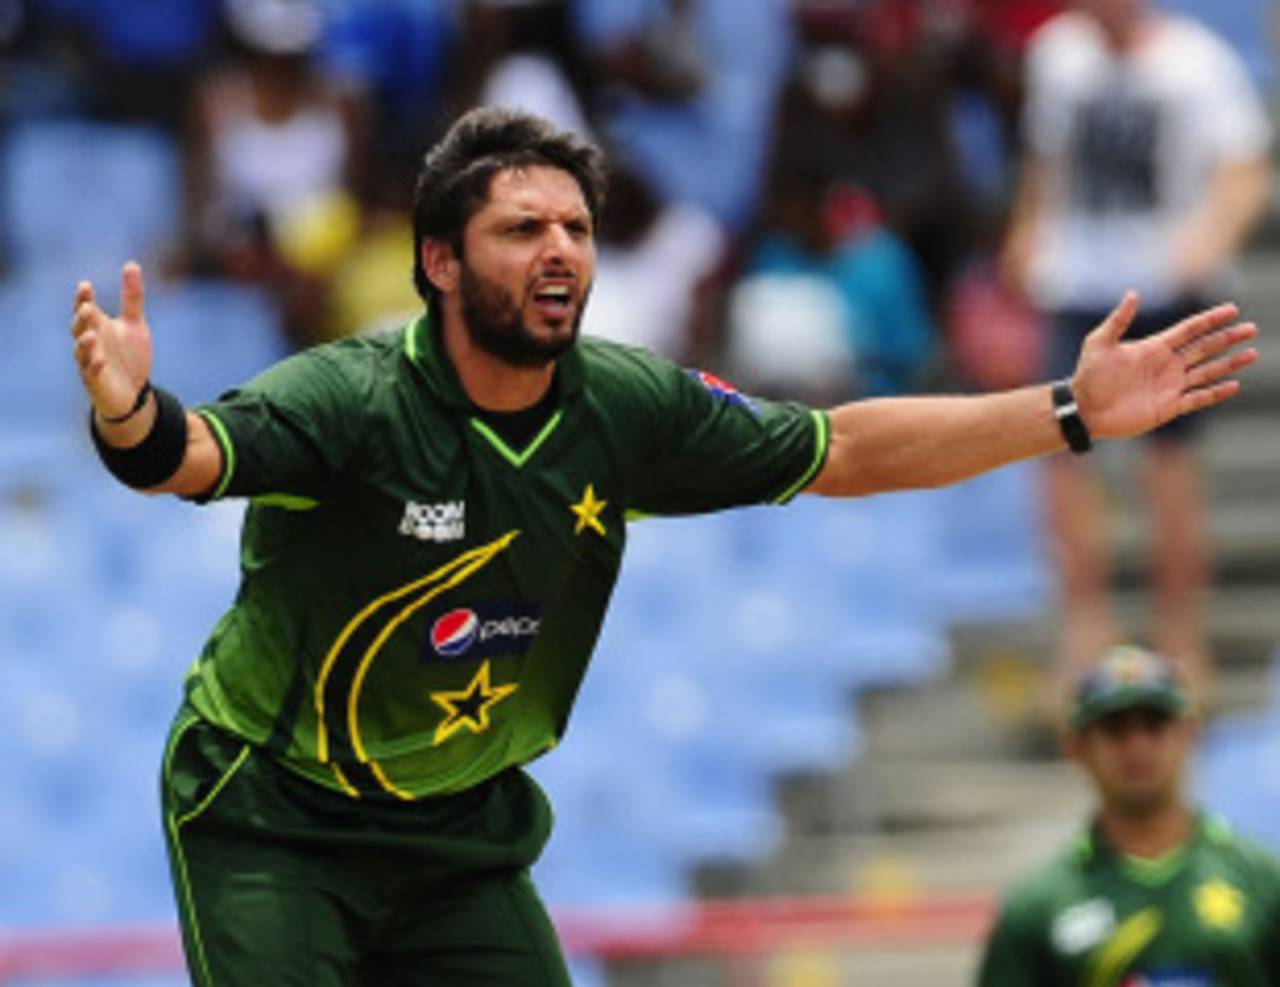 The compromise between the PCB and Afridi could mean while he still has to face a disciplinary committee, his NOC will be reinstated&nbsp;&nbsp;&bull;&nbsp;&nbsp;AFP